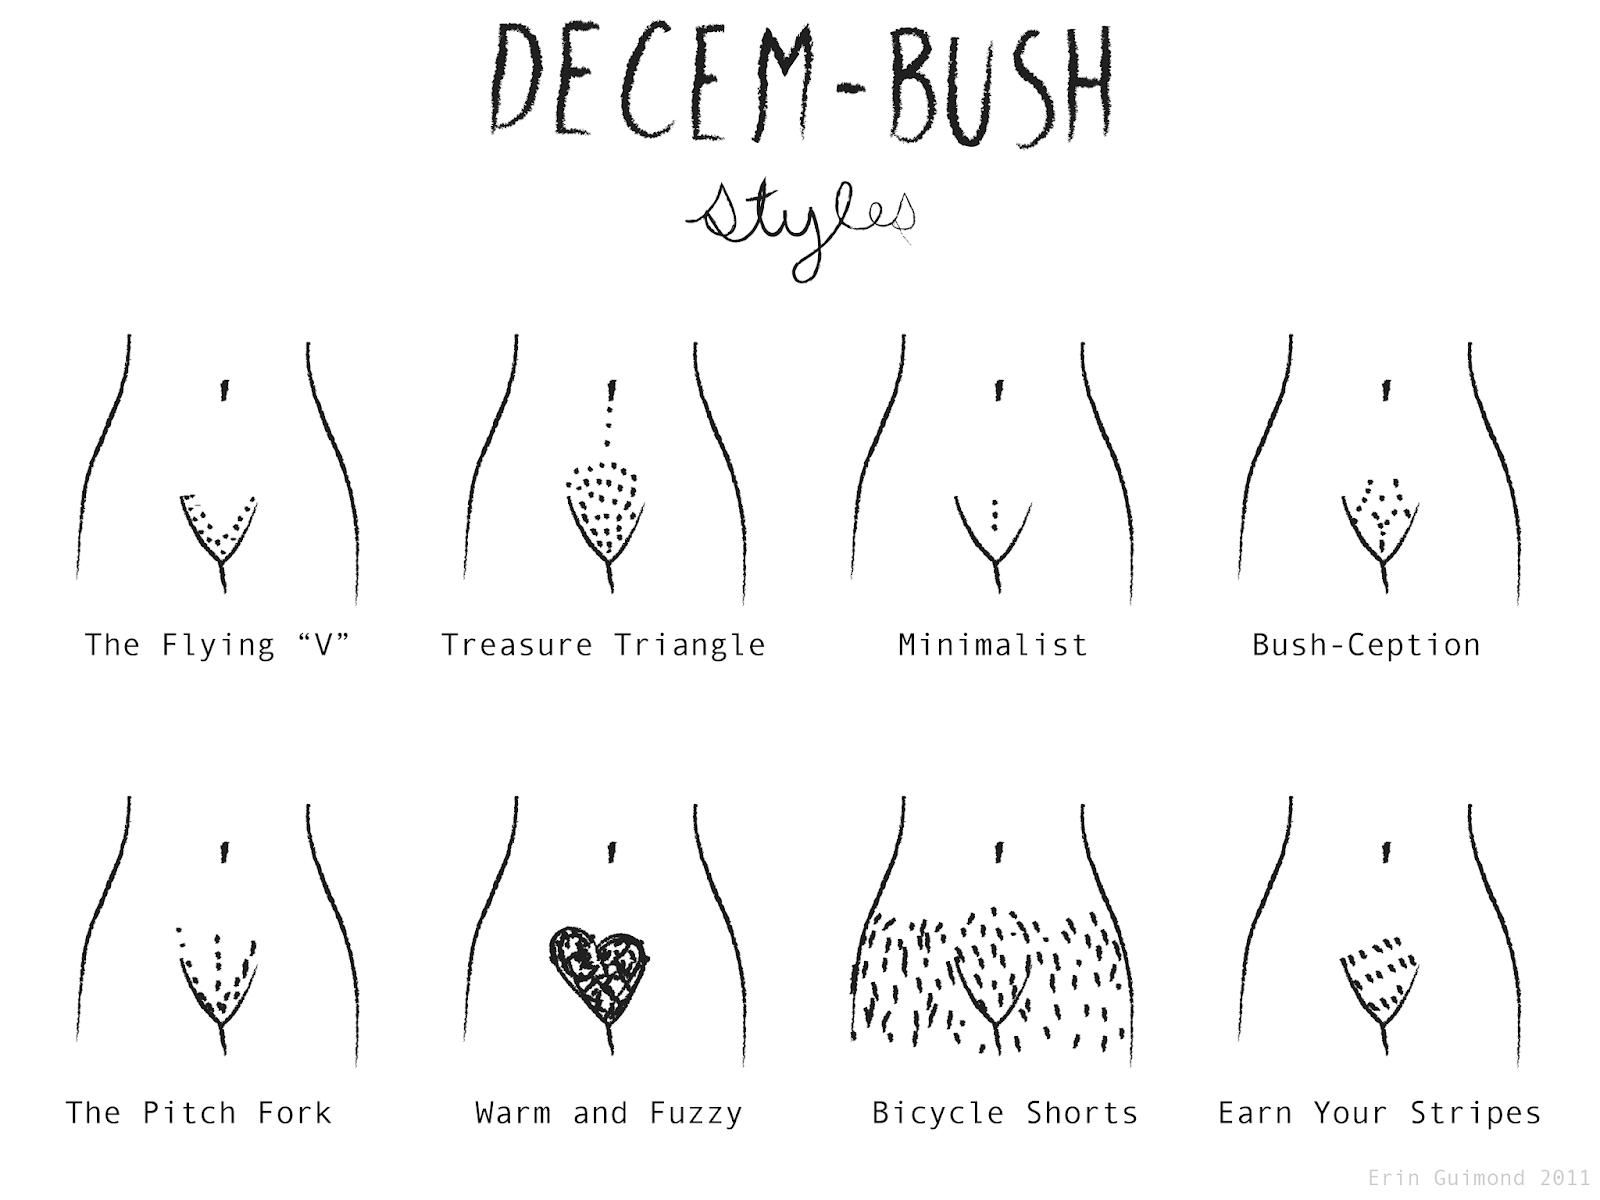 11 Most Popular Pubic Hair Styles For Women